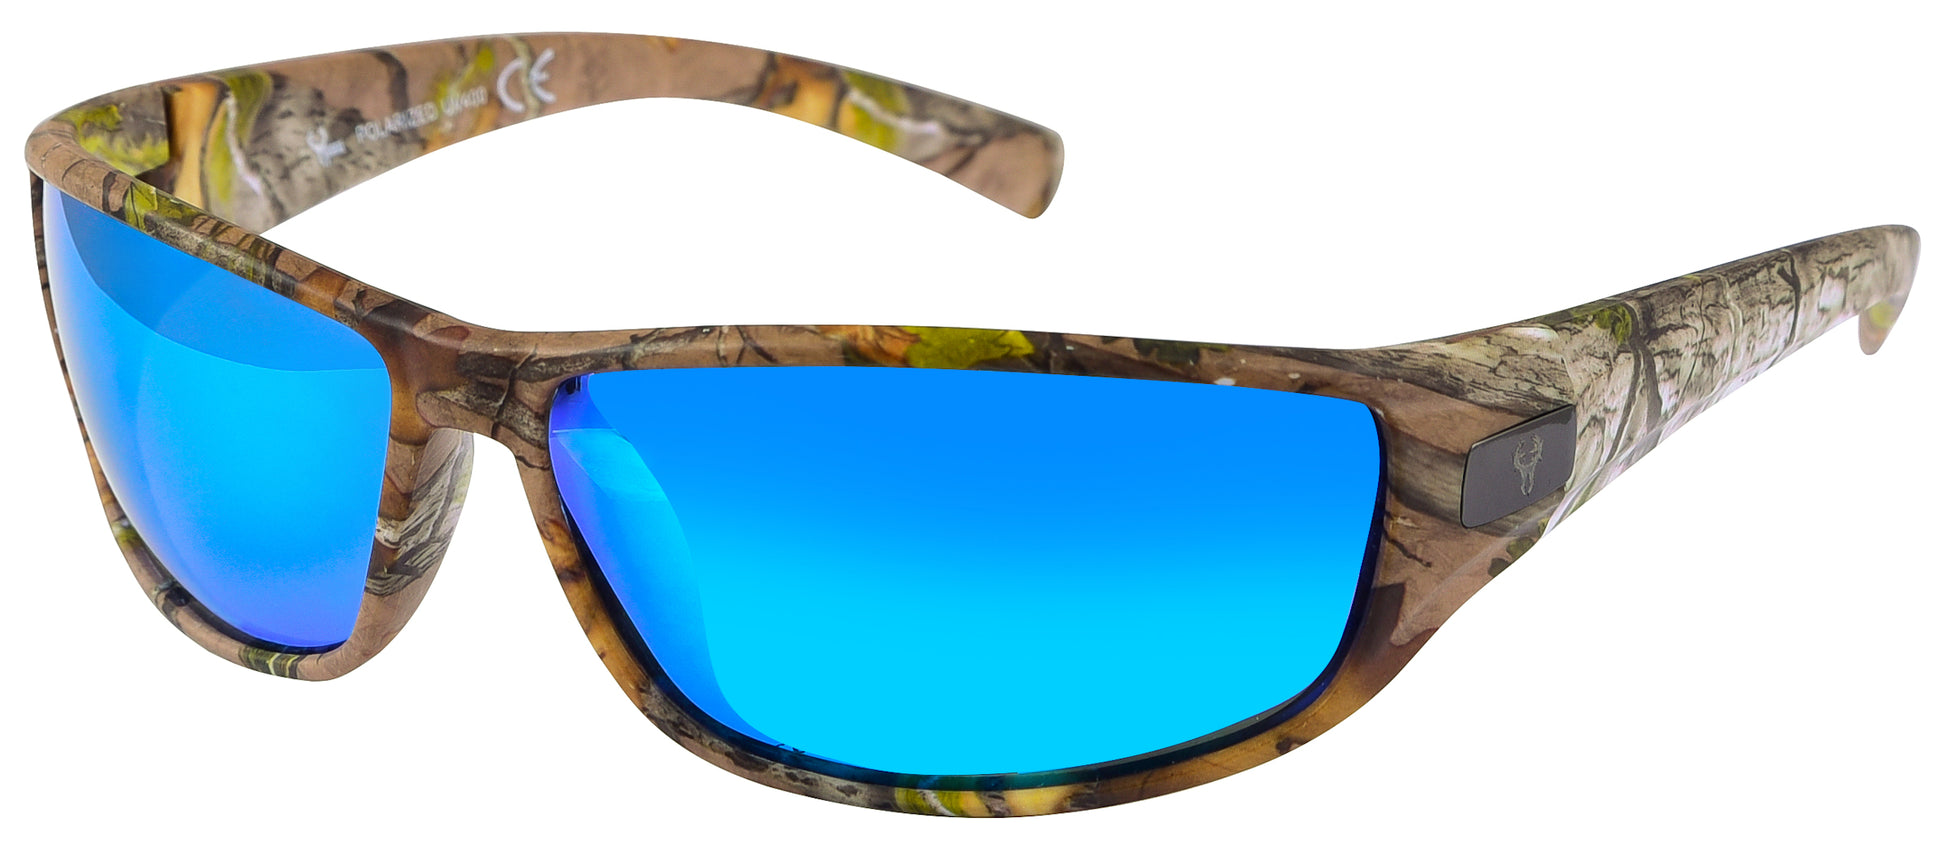 Hornz Brown Forest Camouflage Polarized Sunglasses for Men - WhiteTail -  Free Matching Microfiber Pouch - Brown Camo Frame - Ice Blue Lens – Hornz  Camo